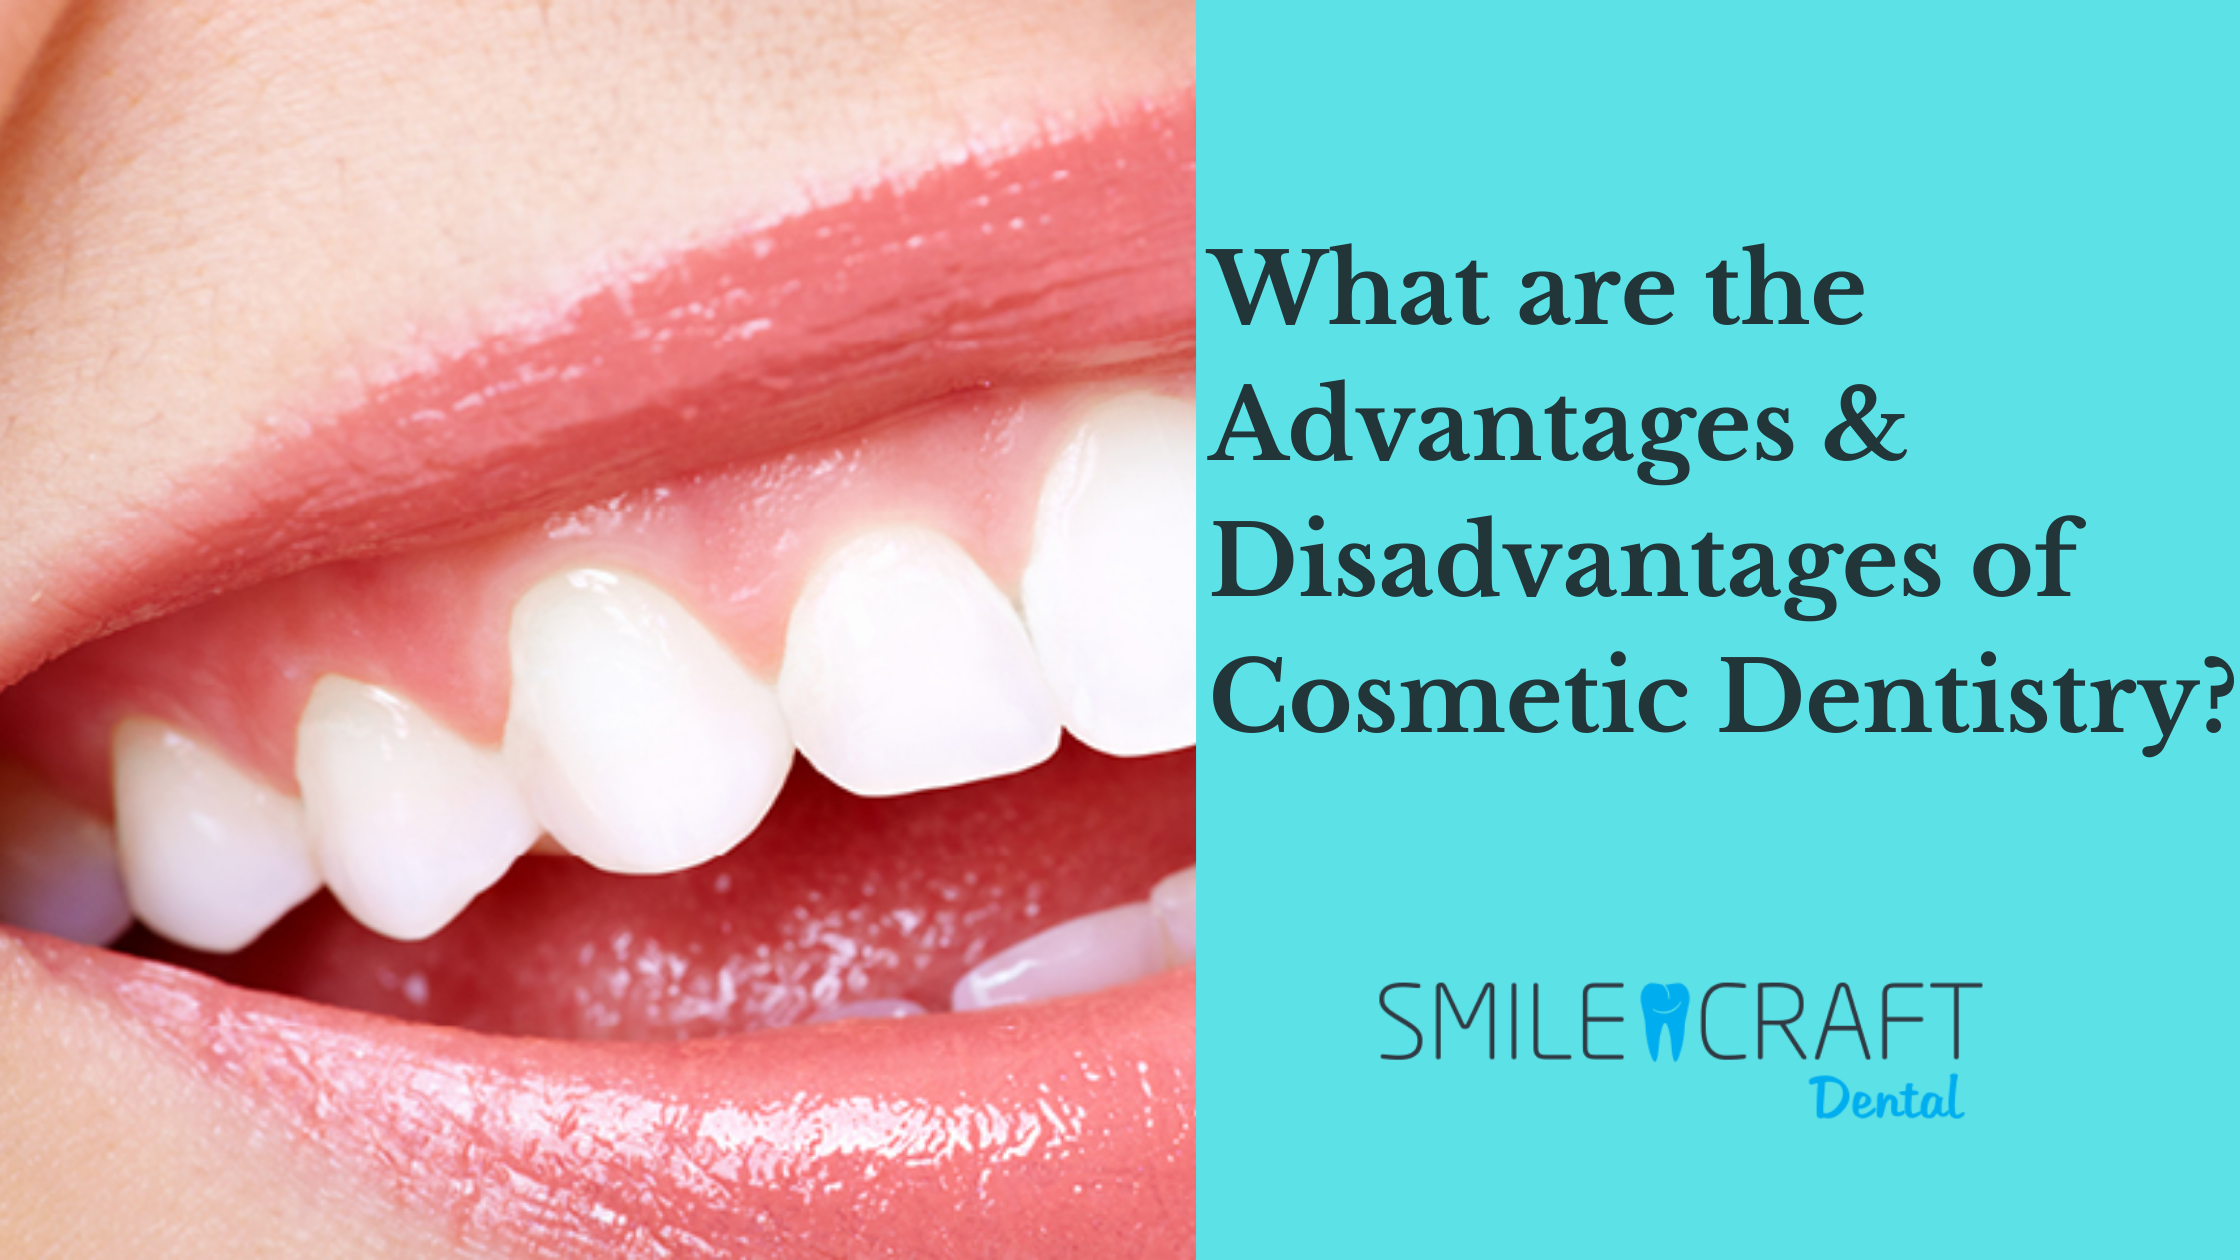 What are the Advantages & Disadvantages of Cosmetic Dentistry?